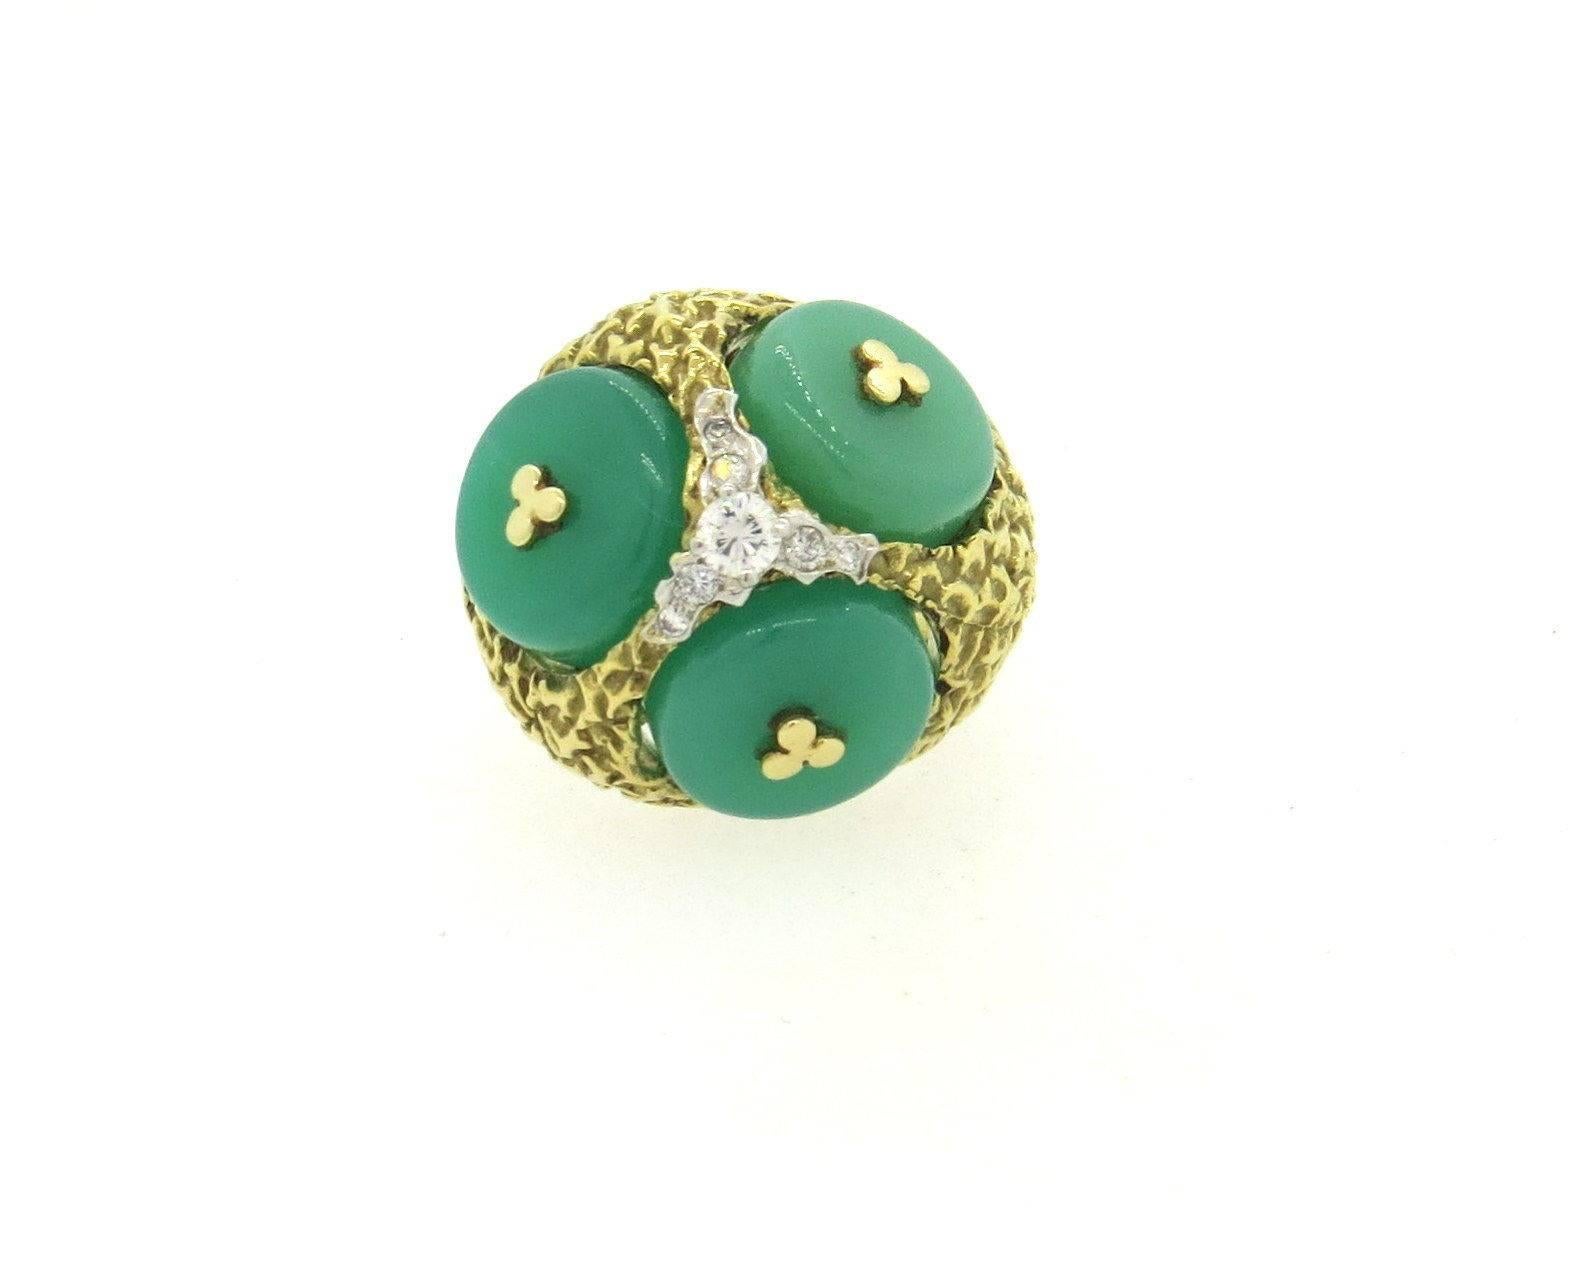 An 18k yellow gold dome ring set with chrysoprase and approximately 0.20ctw of H/VS diamonds.  The ring is a size 6, ring top is 21mm x 24mm, sits approx. 15mm from the finger.  The weight of the ring is 22.1 grams.  Not marked but tested 18k gold.